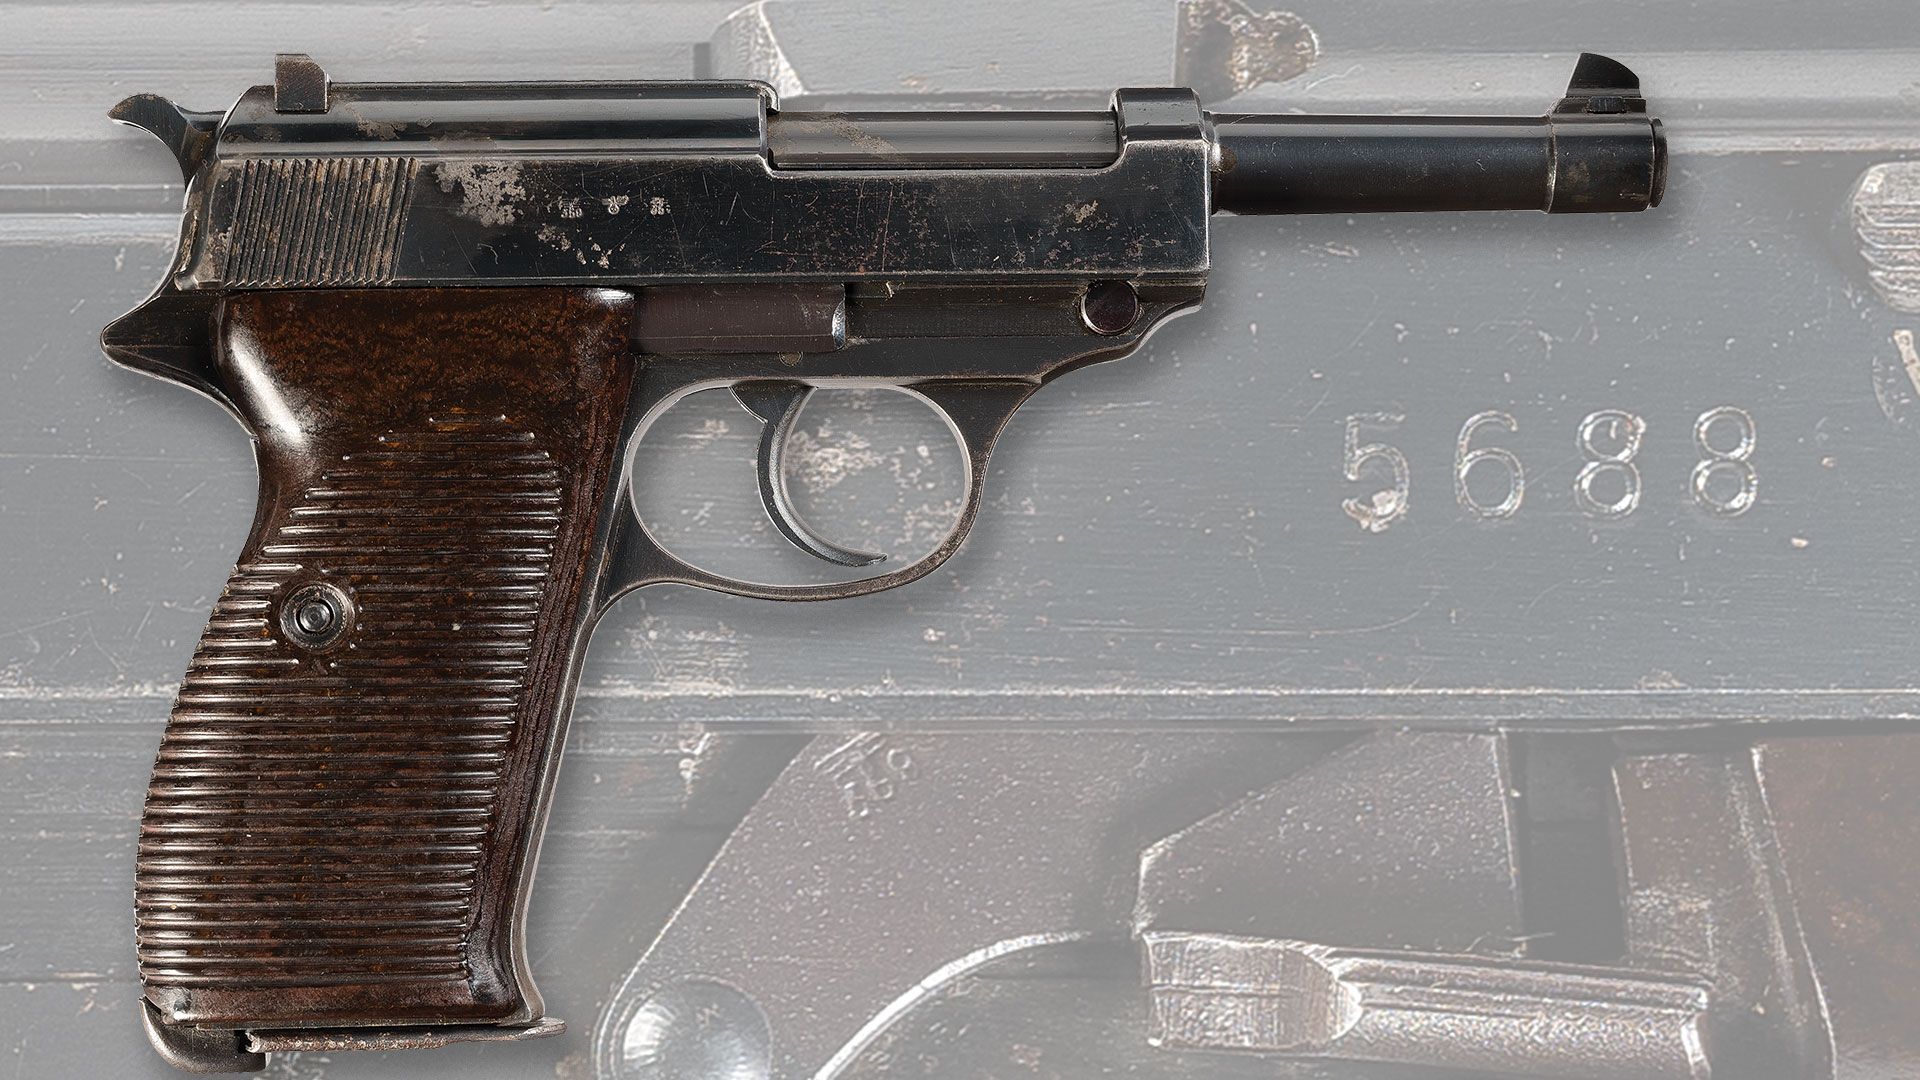 Rare-Early-World-War-II-German-Military-Production-Walther-480-Code-P.38-Semi-Automatic-Pistol-with-Matching-Magazine